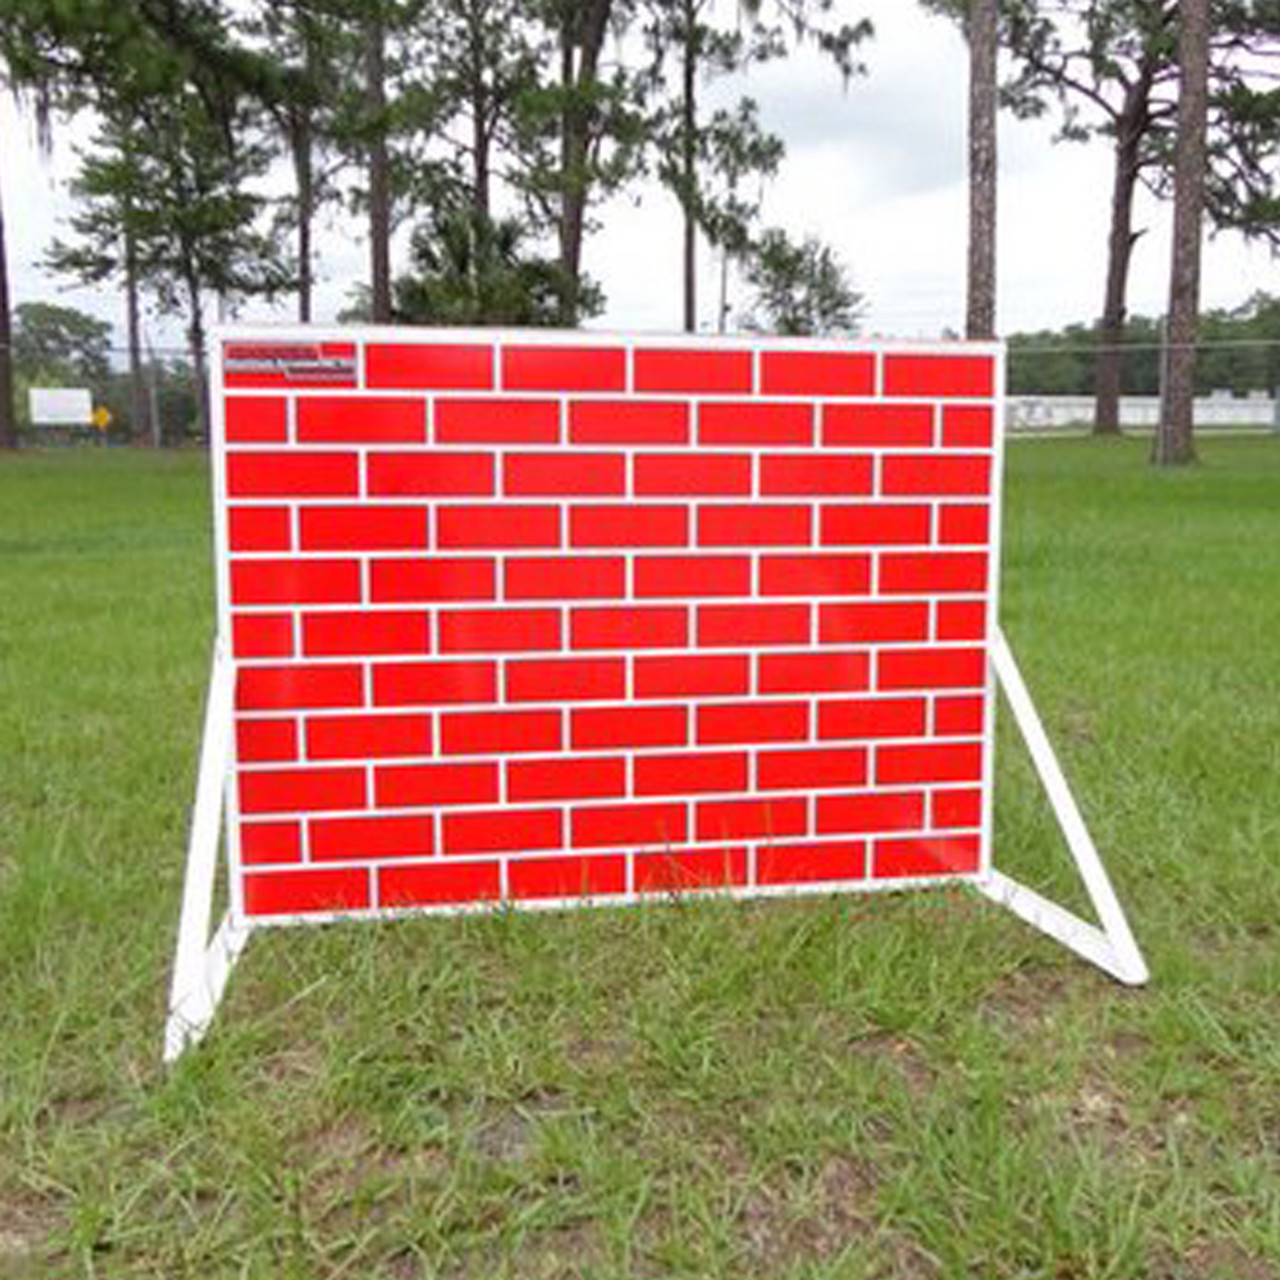 American Aluminum K9 E/Z U.S.P.C.A. Obstacle Course Group I, Includes Brick Wall, White Wall, Green Wall, Chain Link Fence, Window Jump, Picket Fence and Broad Jumps